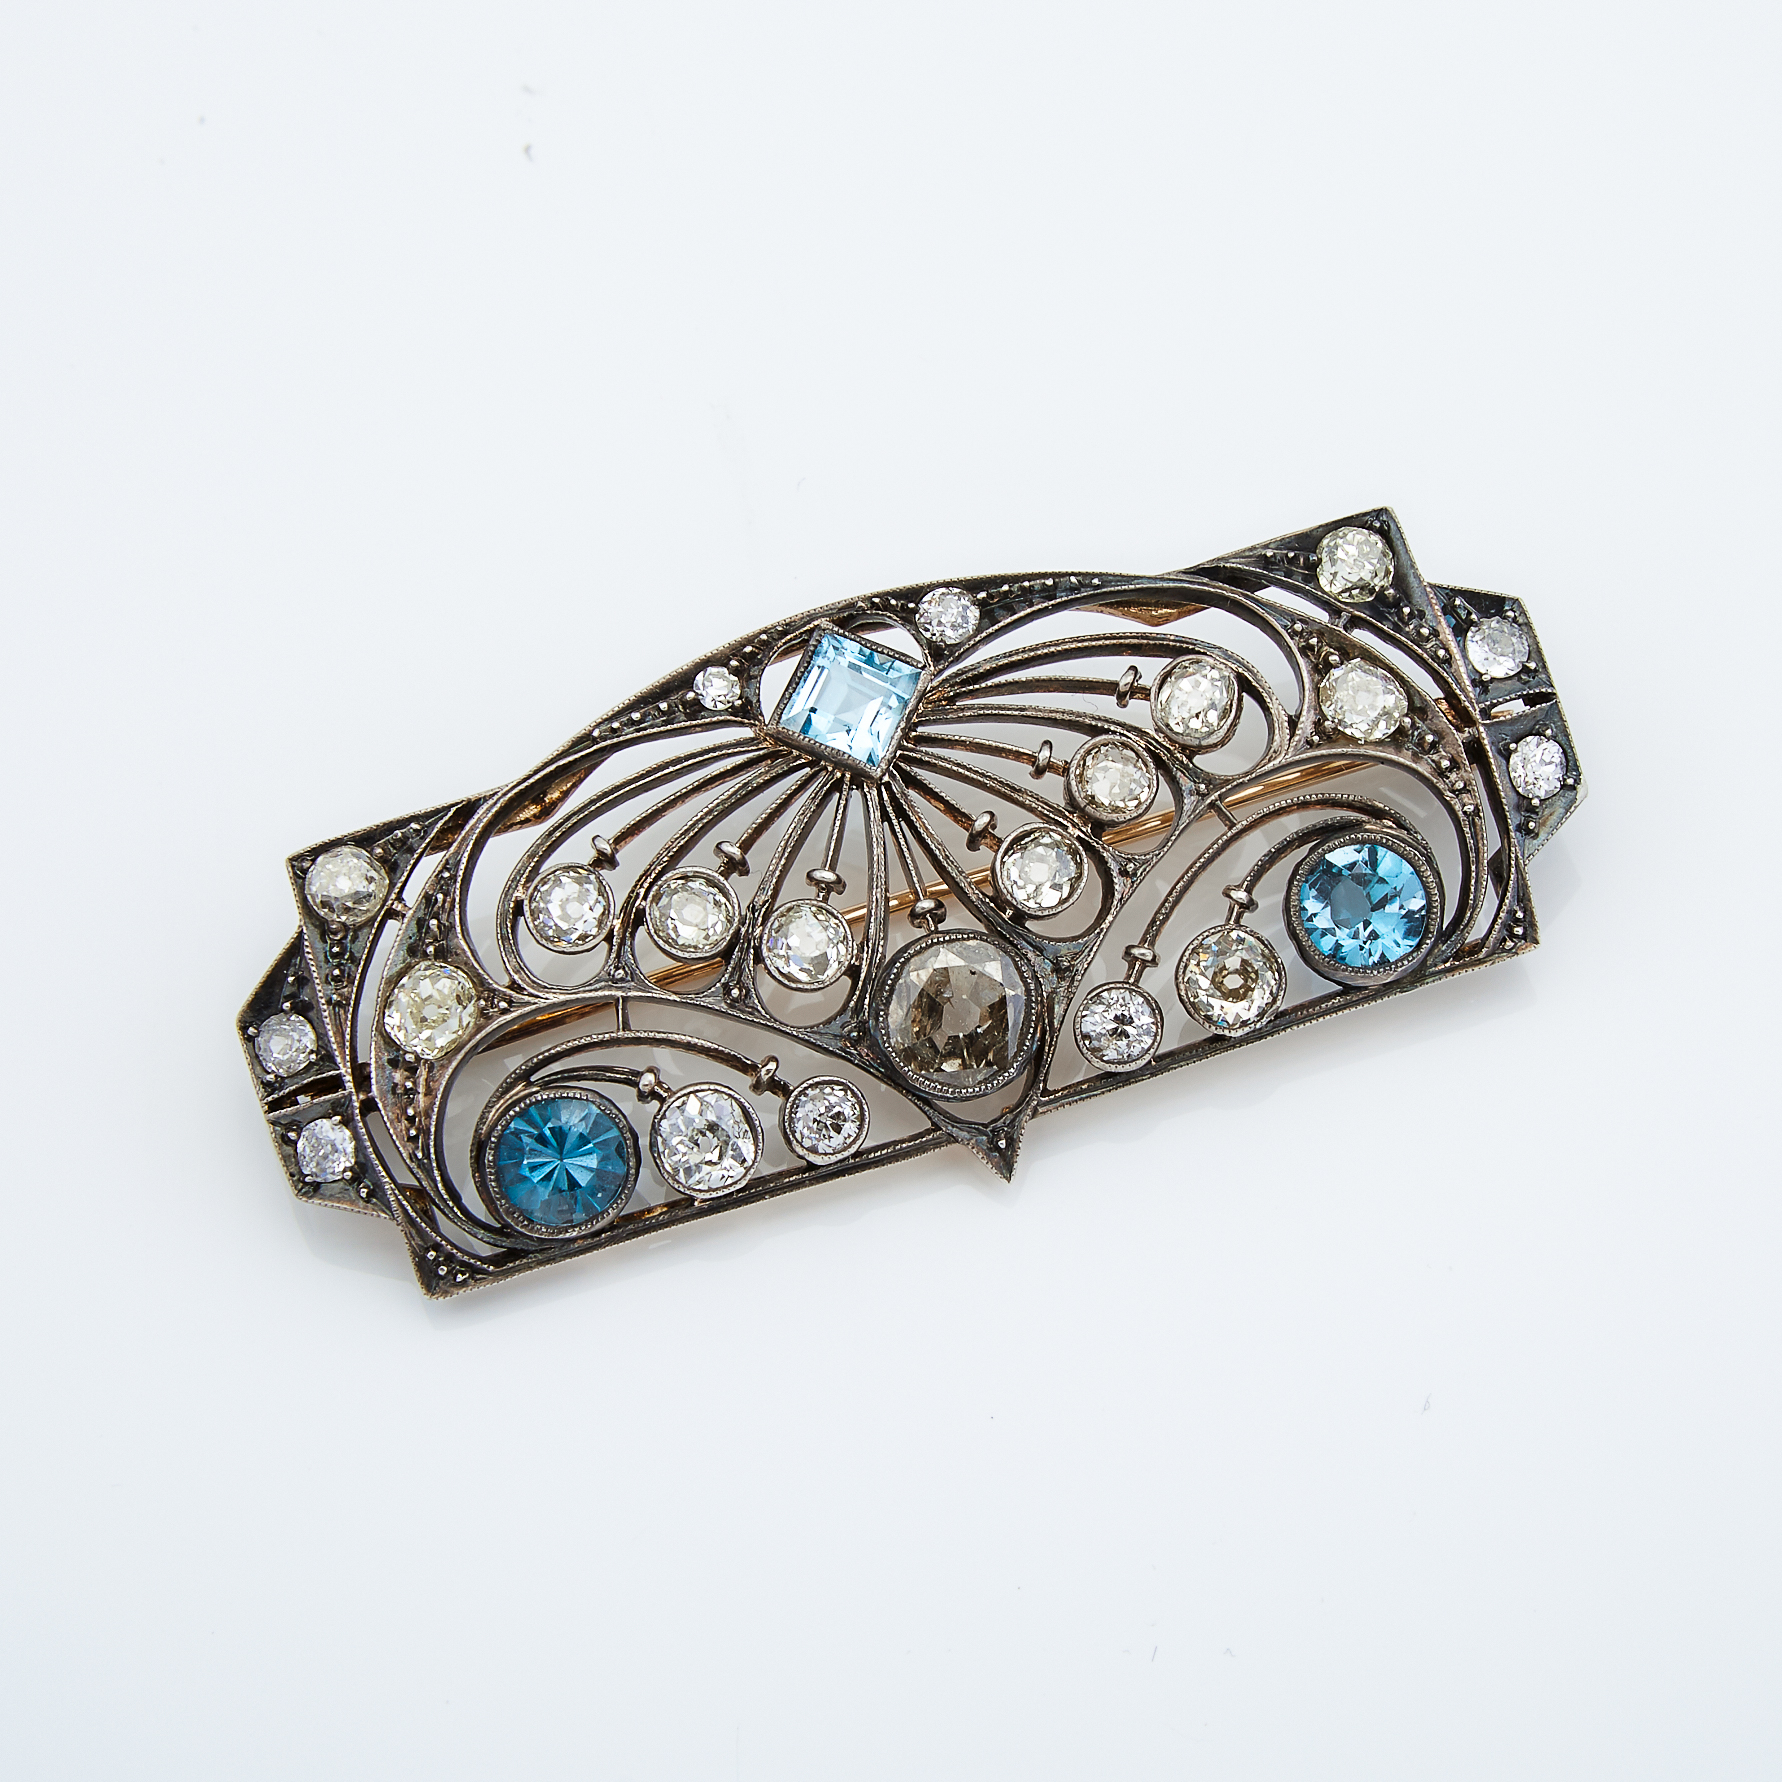 14K Yellow Gold and Silver Filigree Brooch